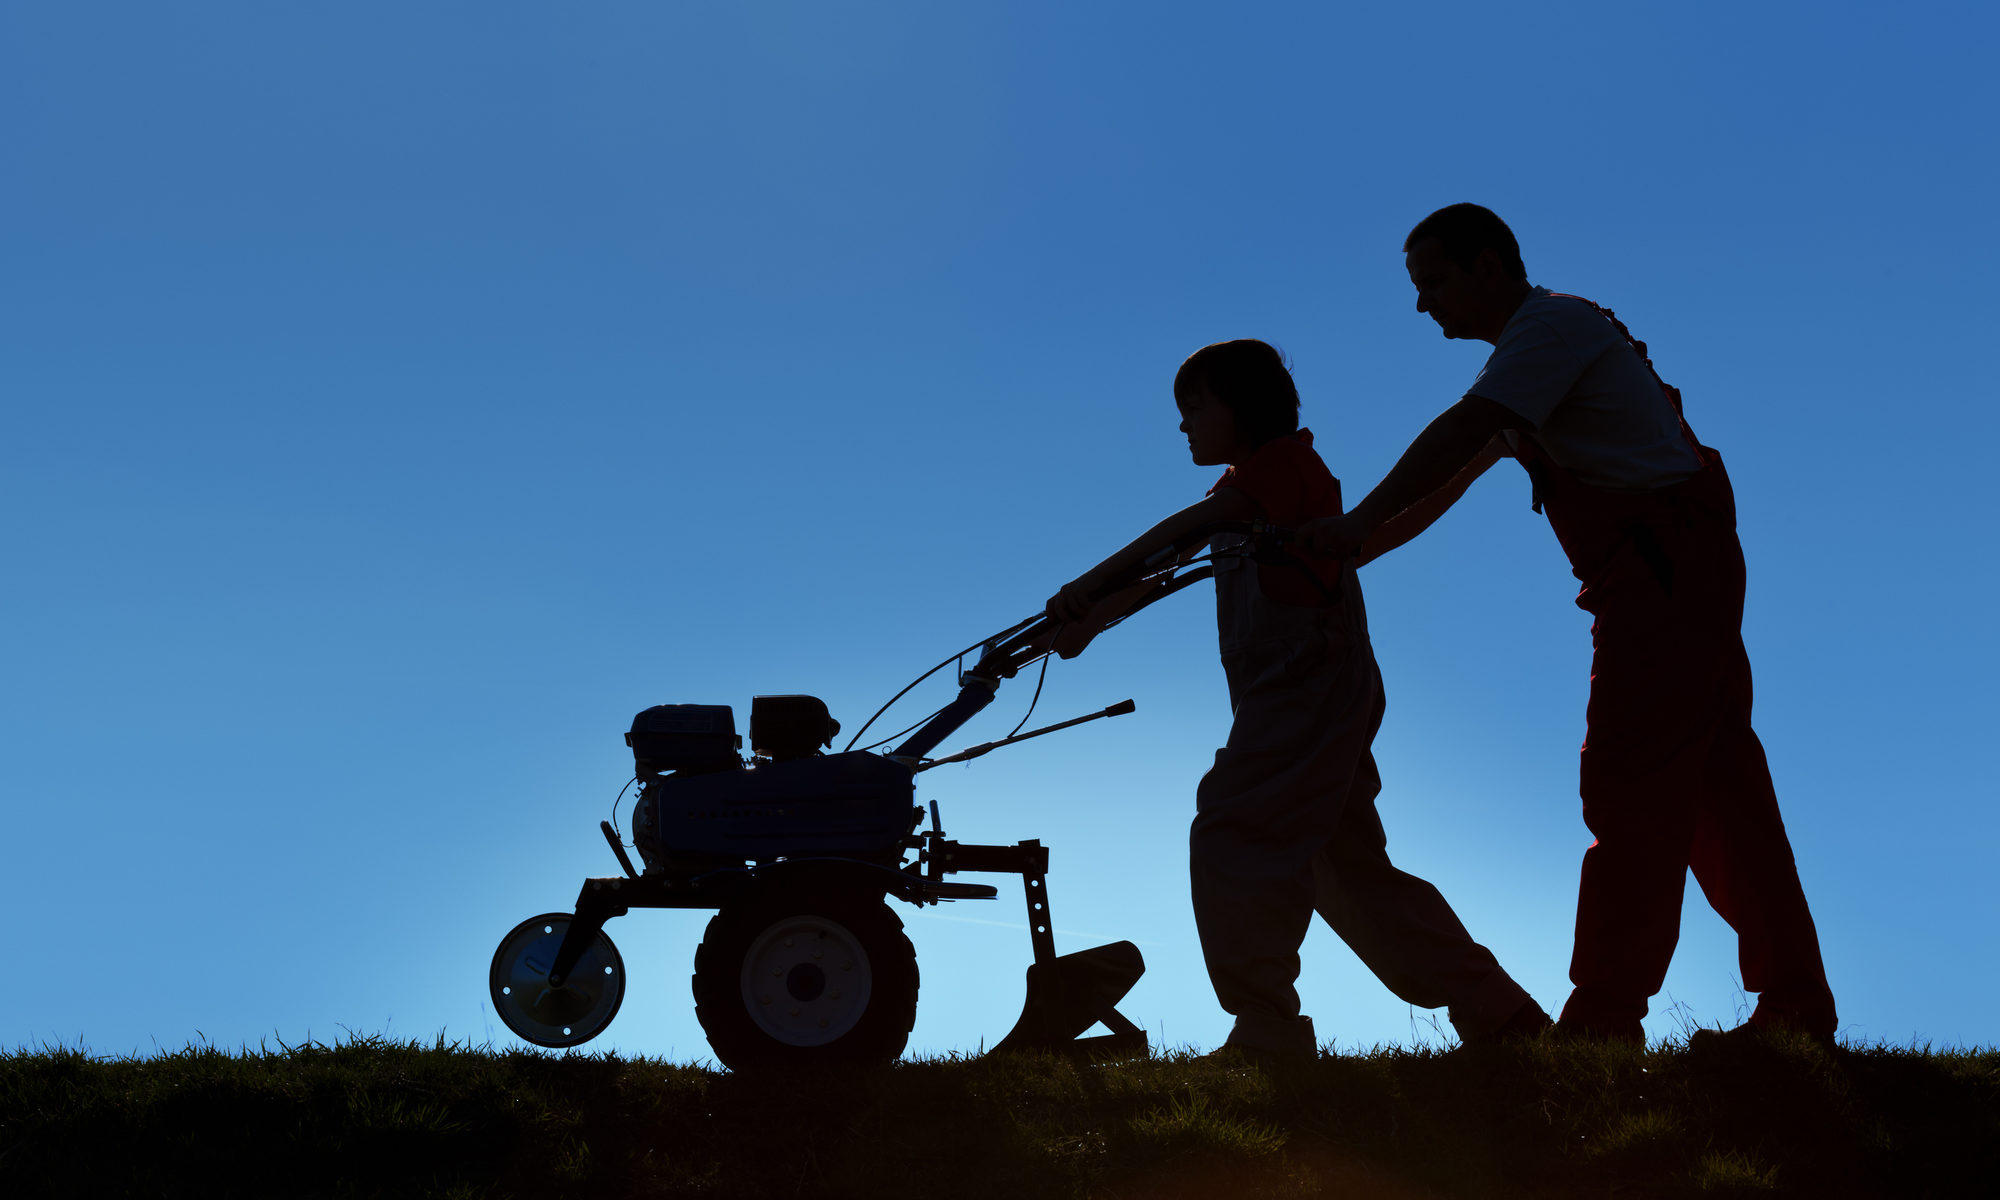 photograph of father and son silhouette working tiller